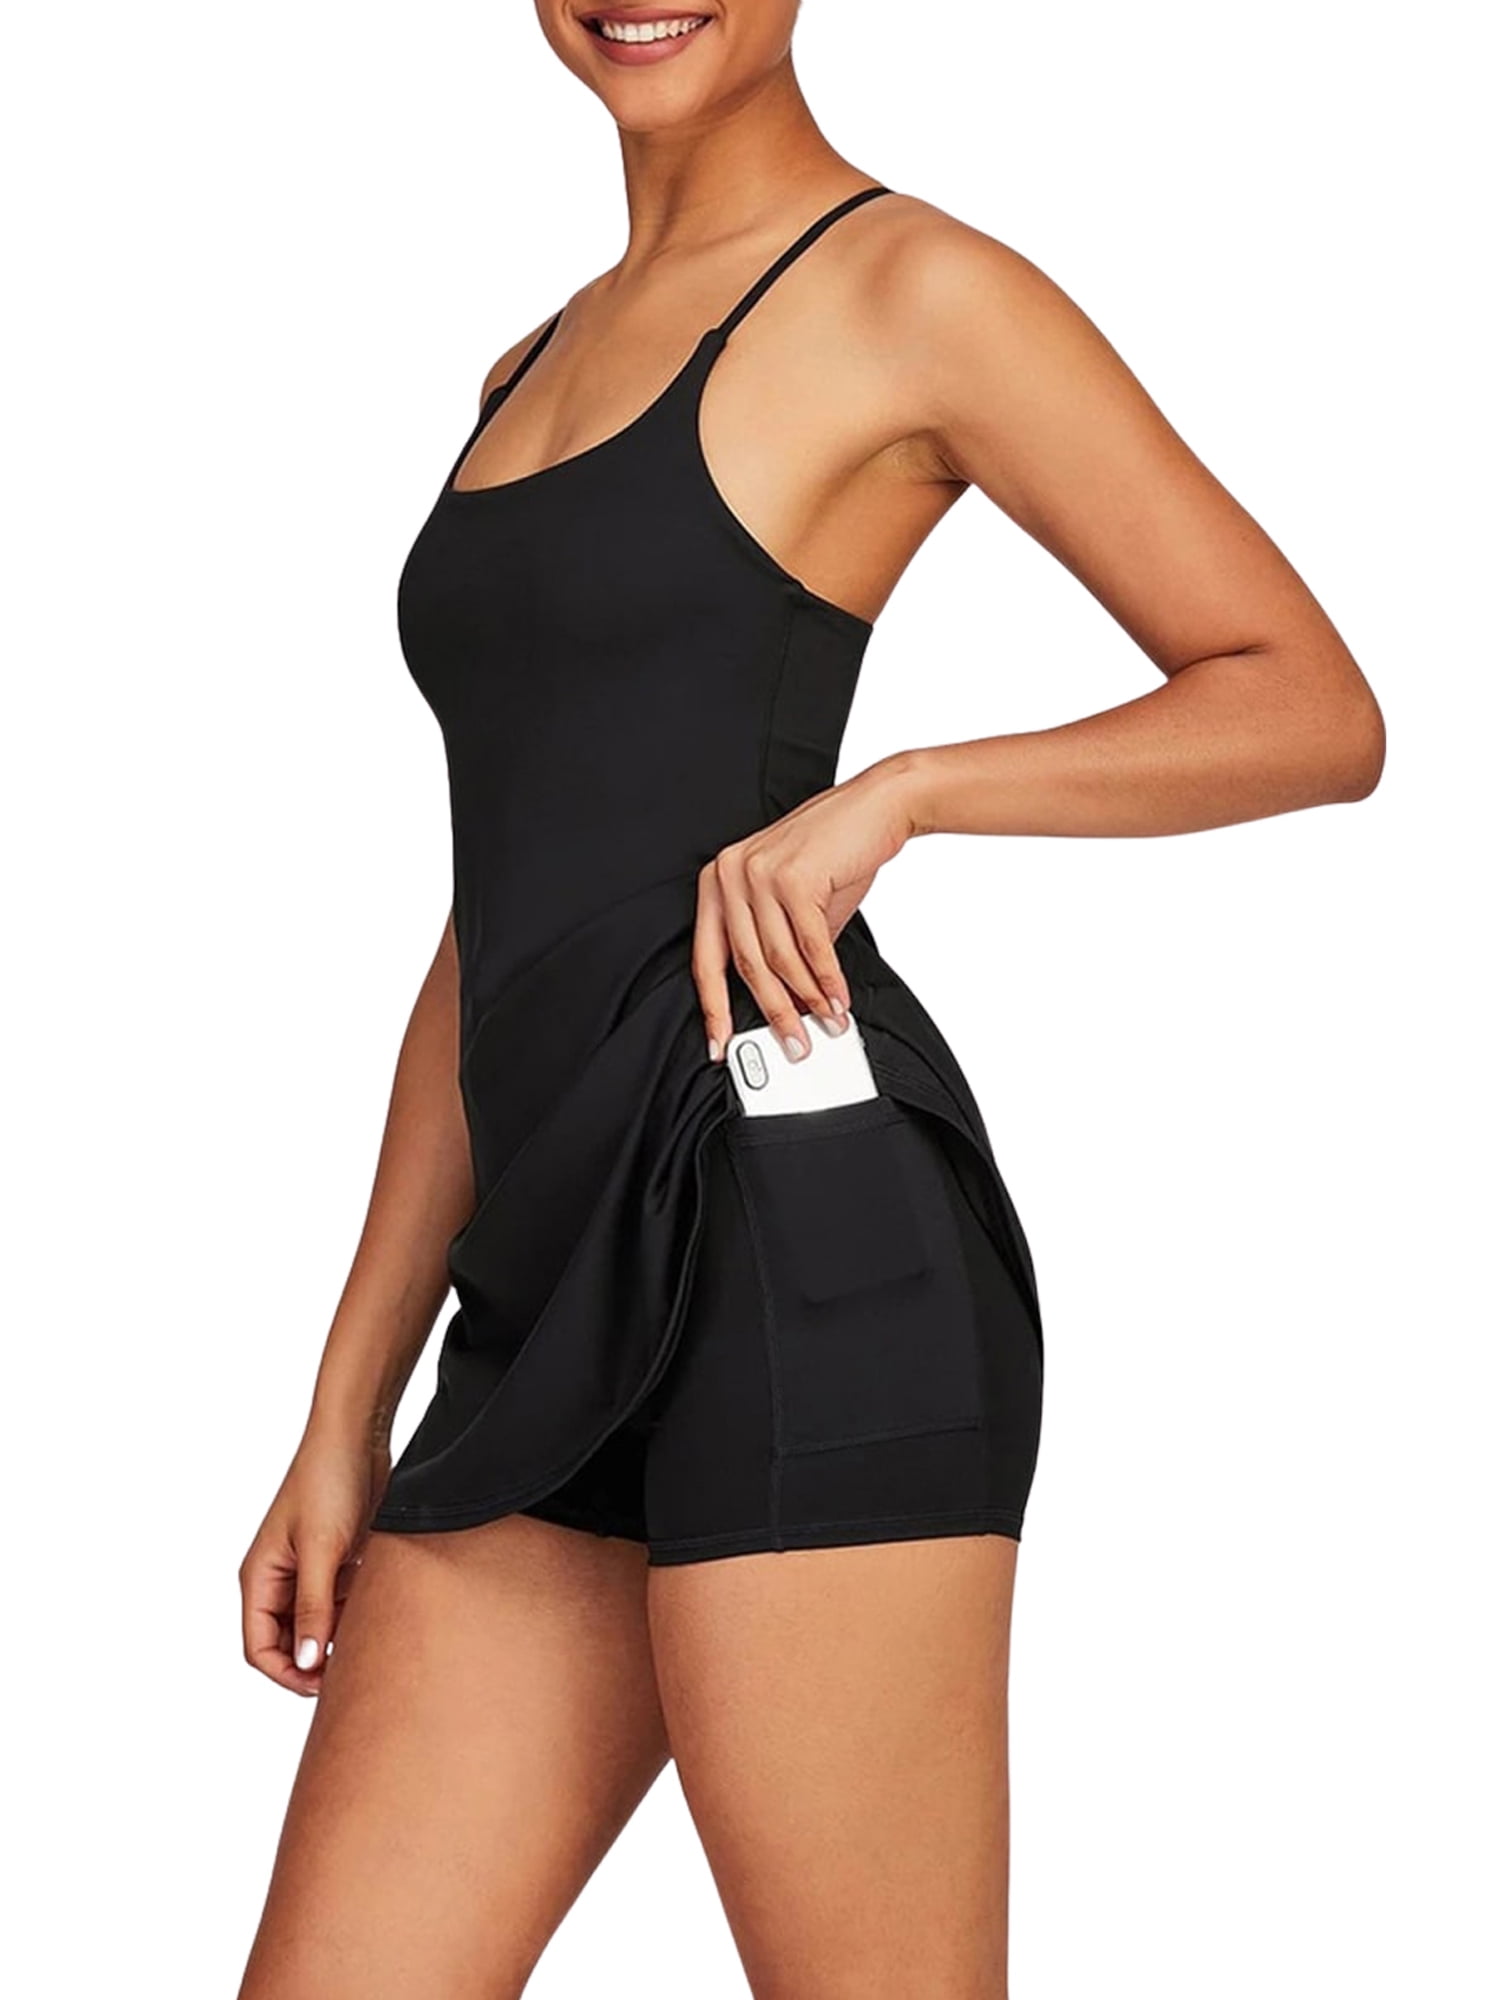 JBEELATE Womens Exercise Workout Dress ...